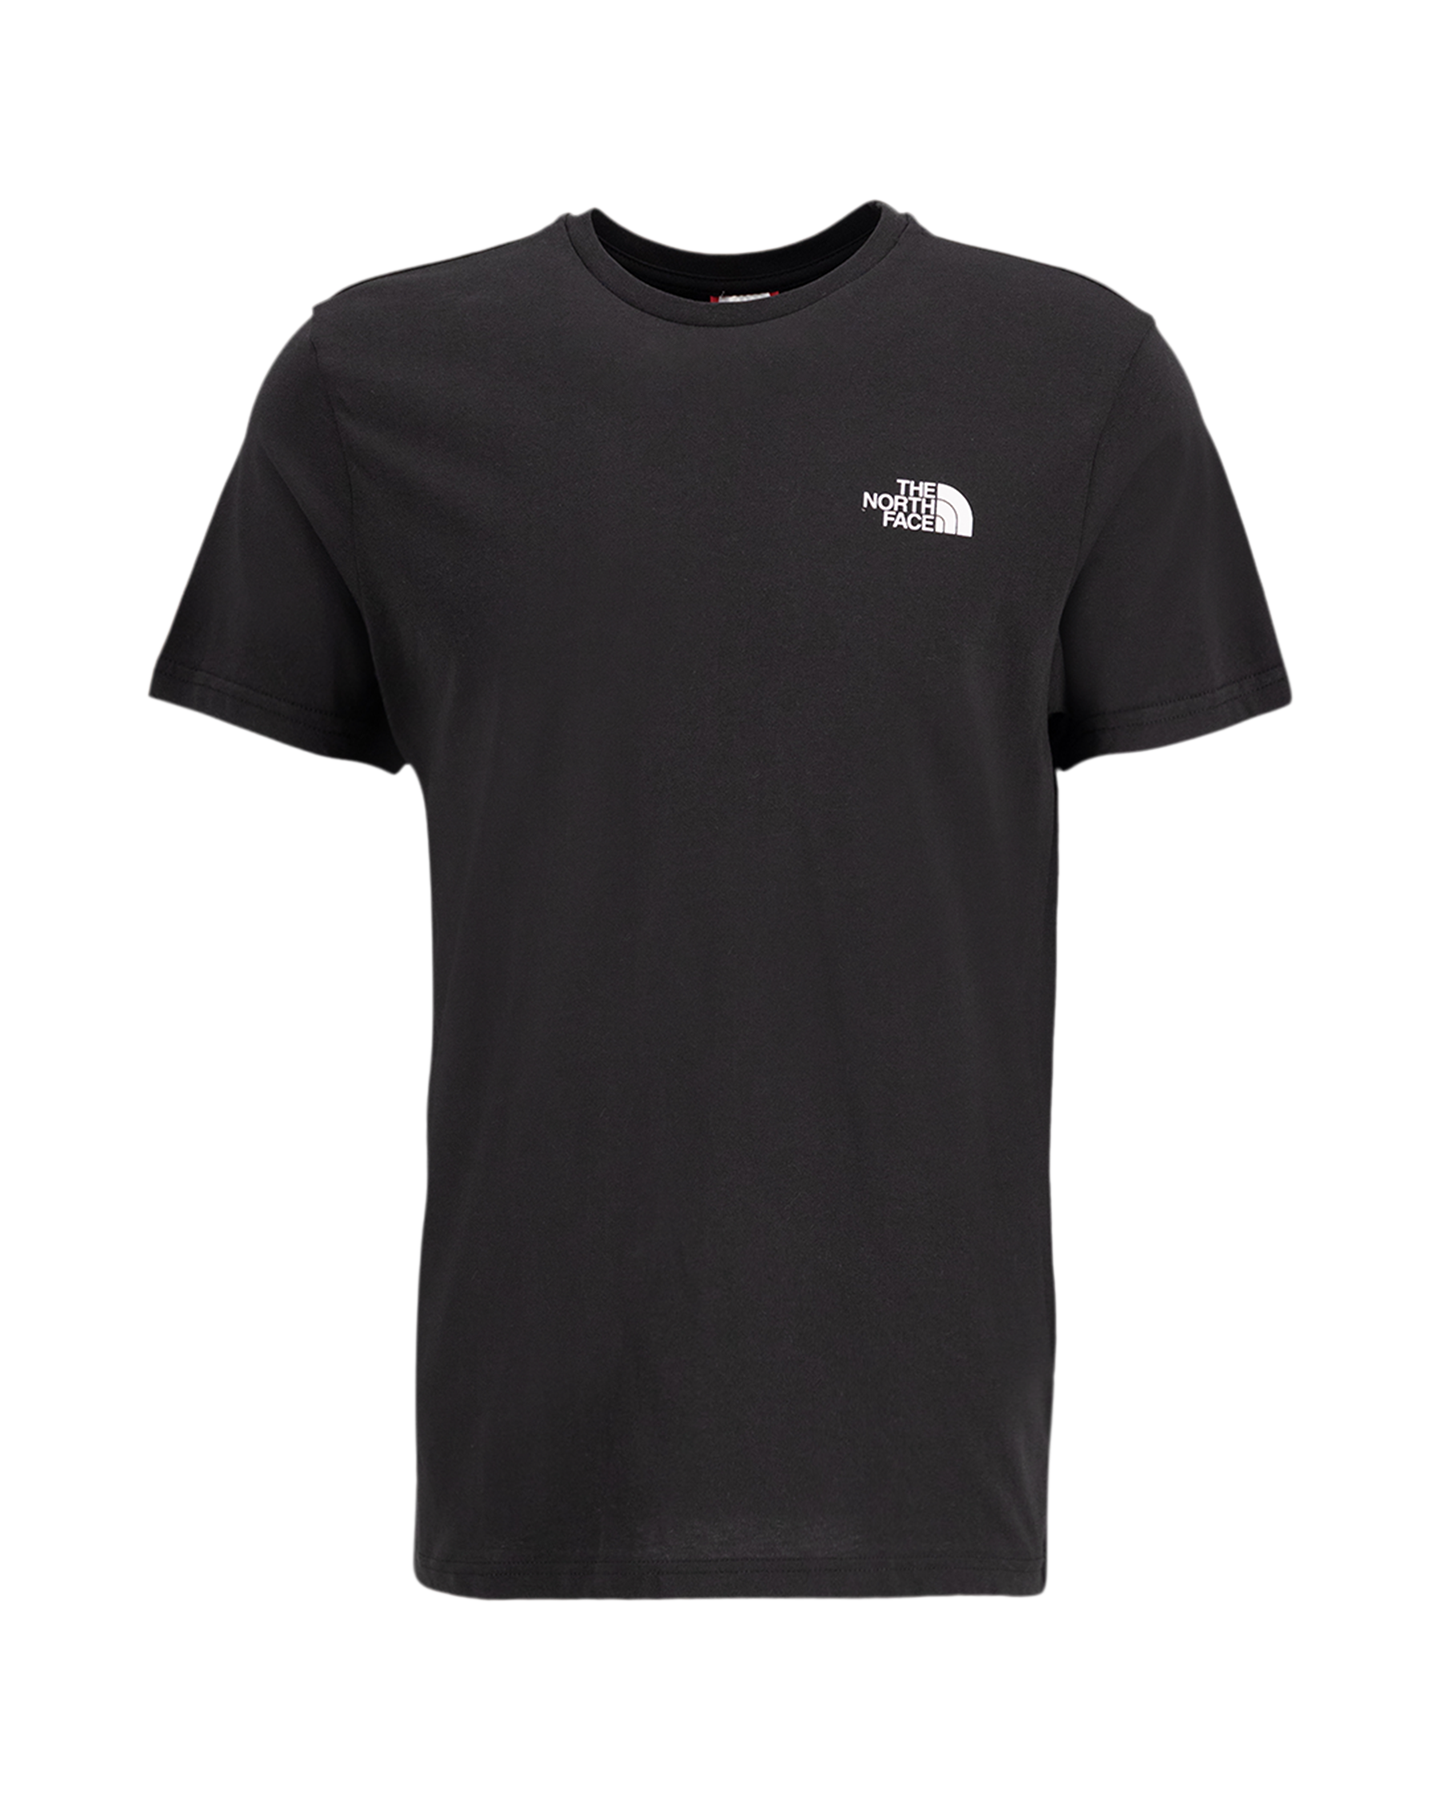 The North Face S/S Simple Dome Tee ZWART 0